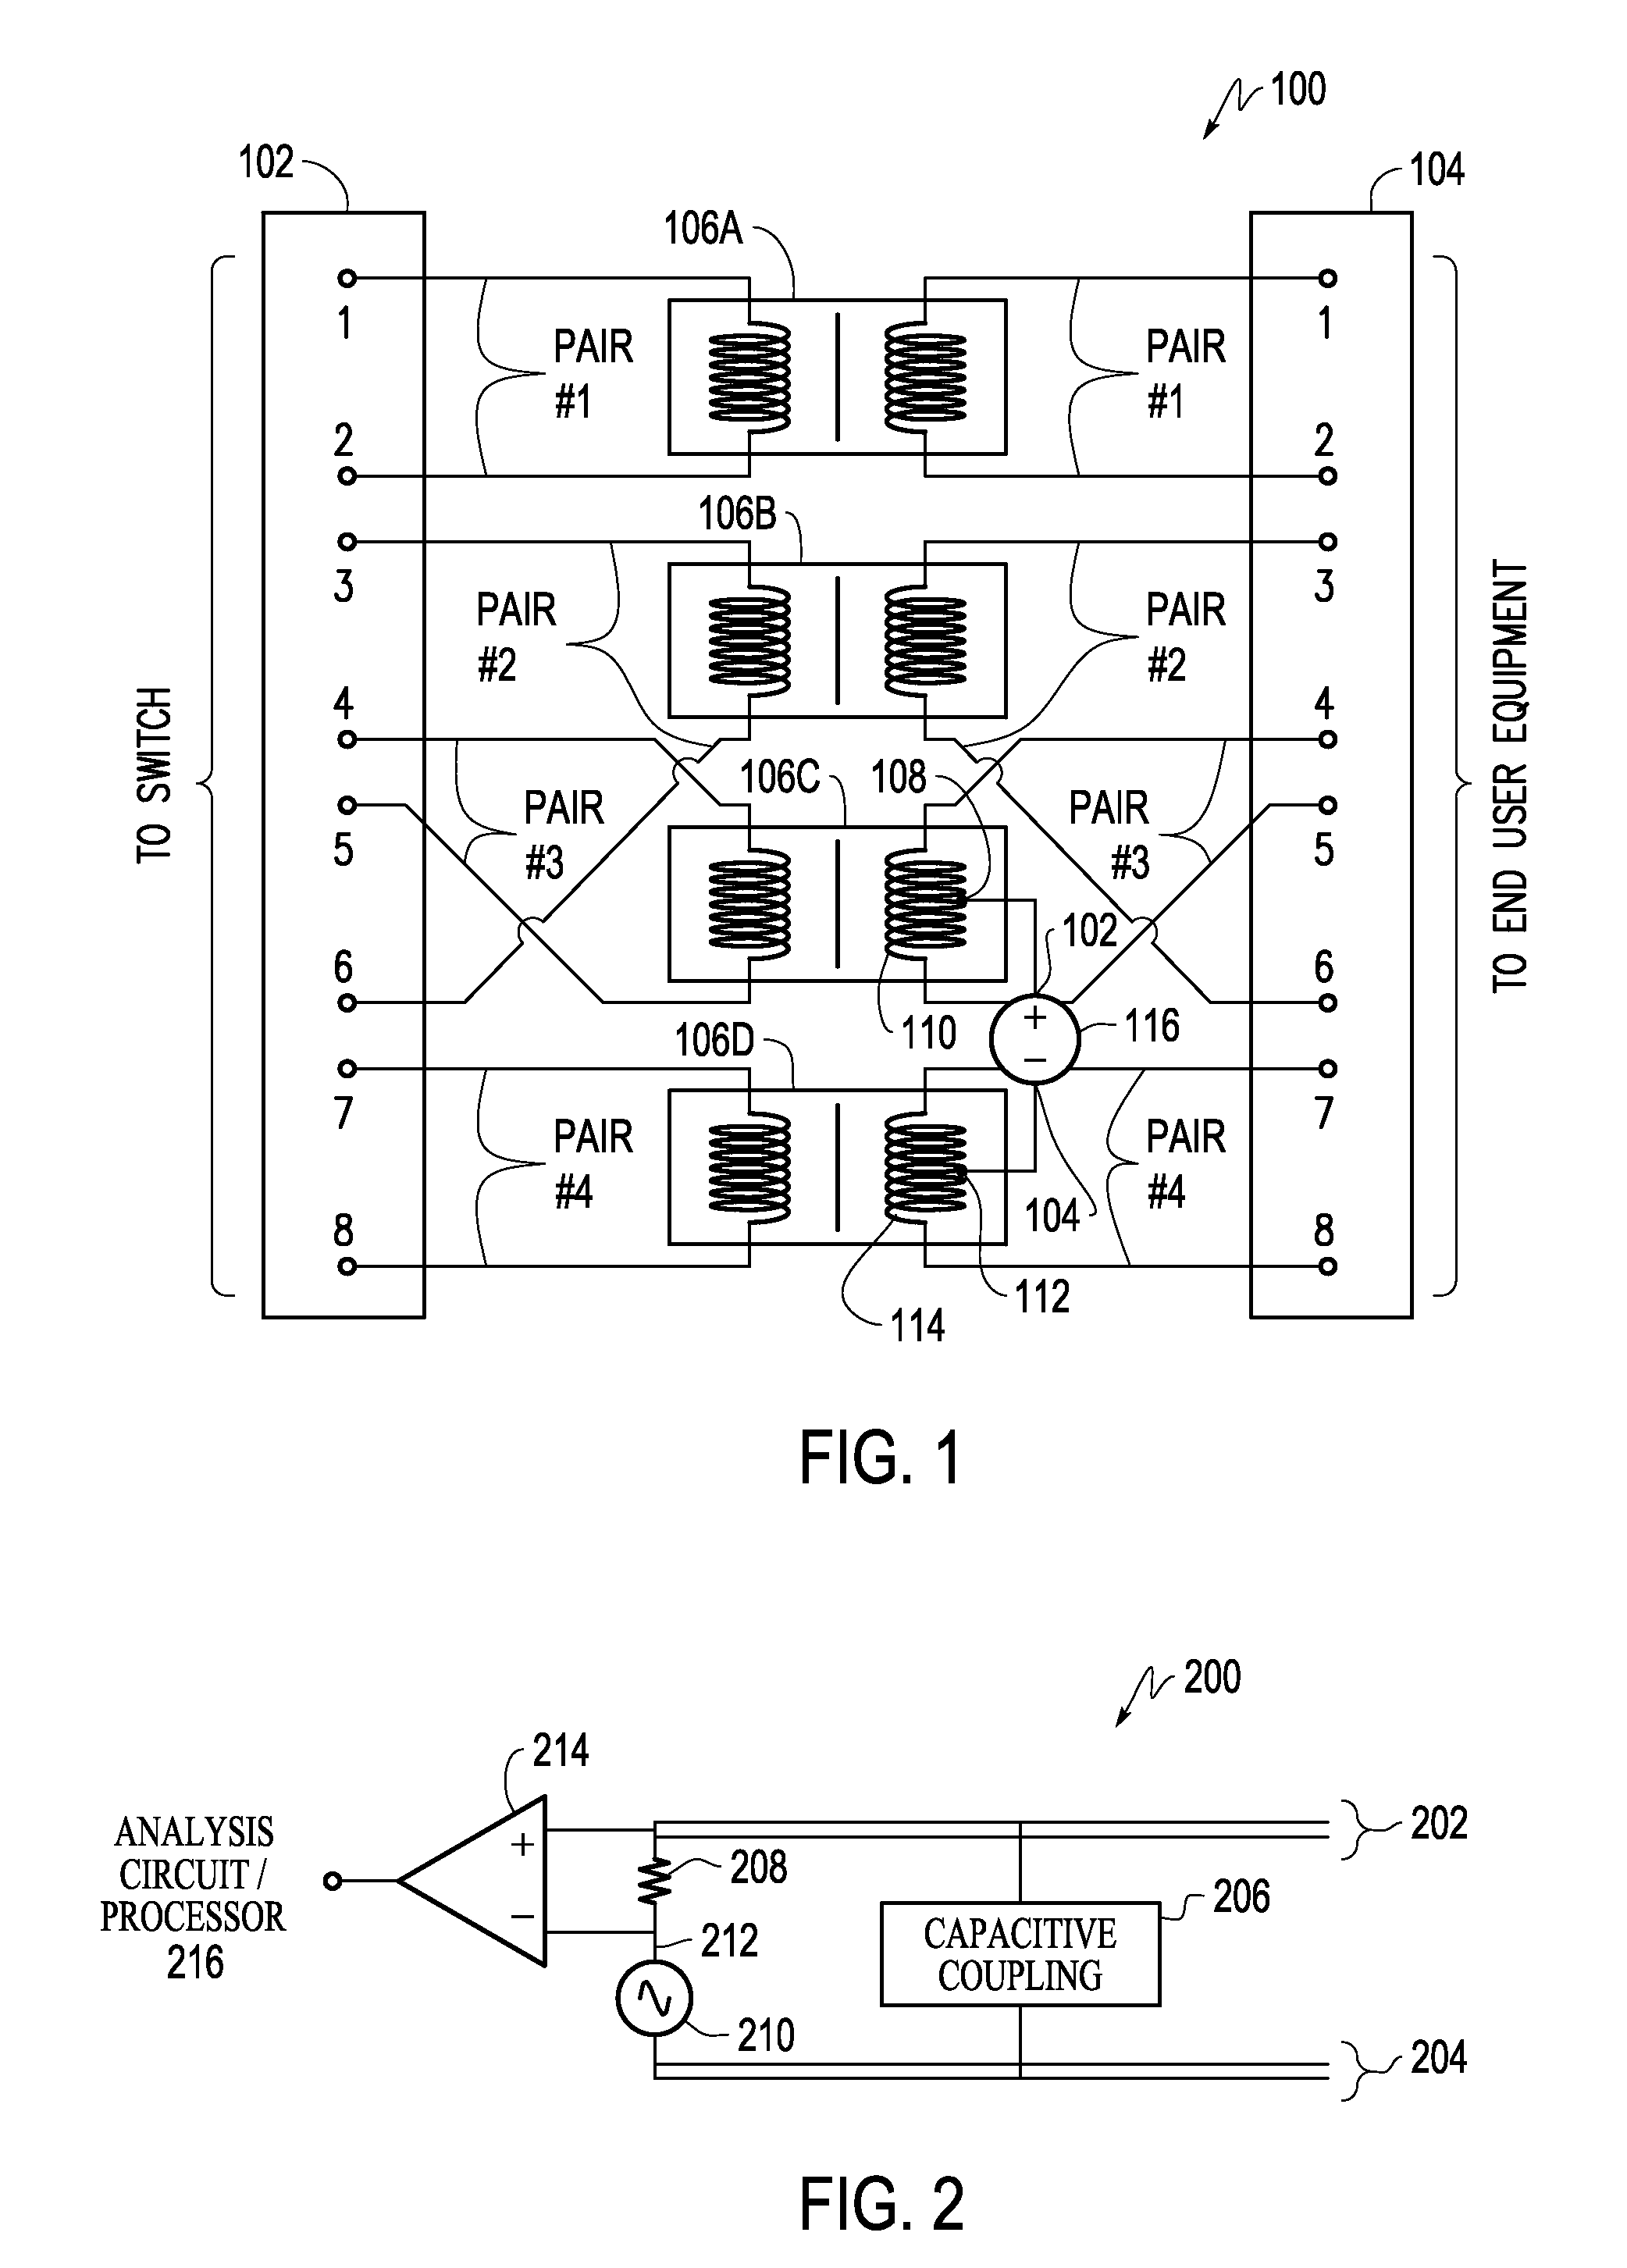 Power patch panel with guided mac capability